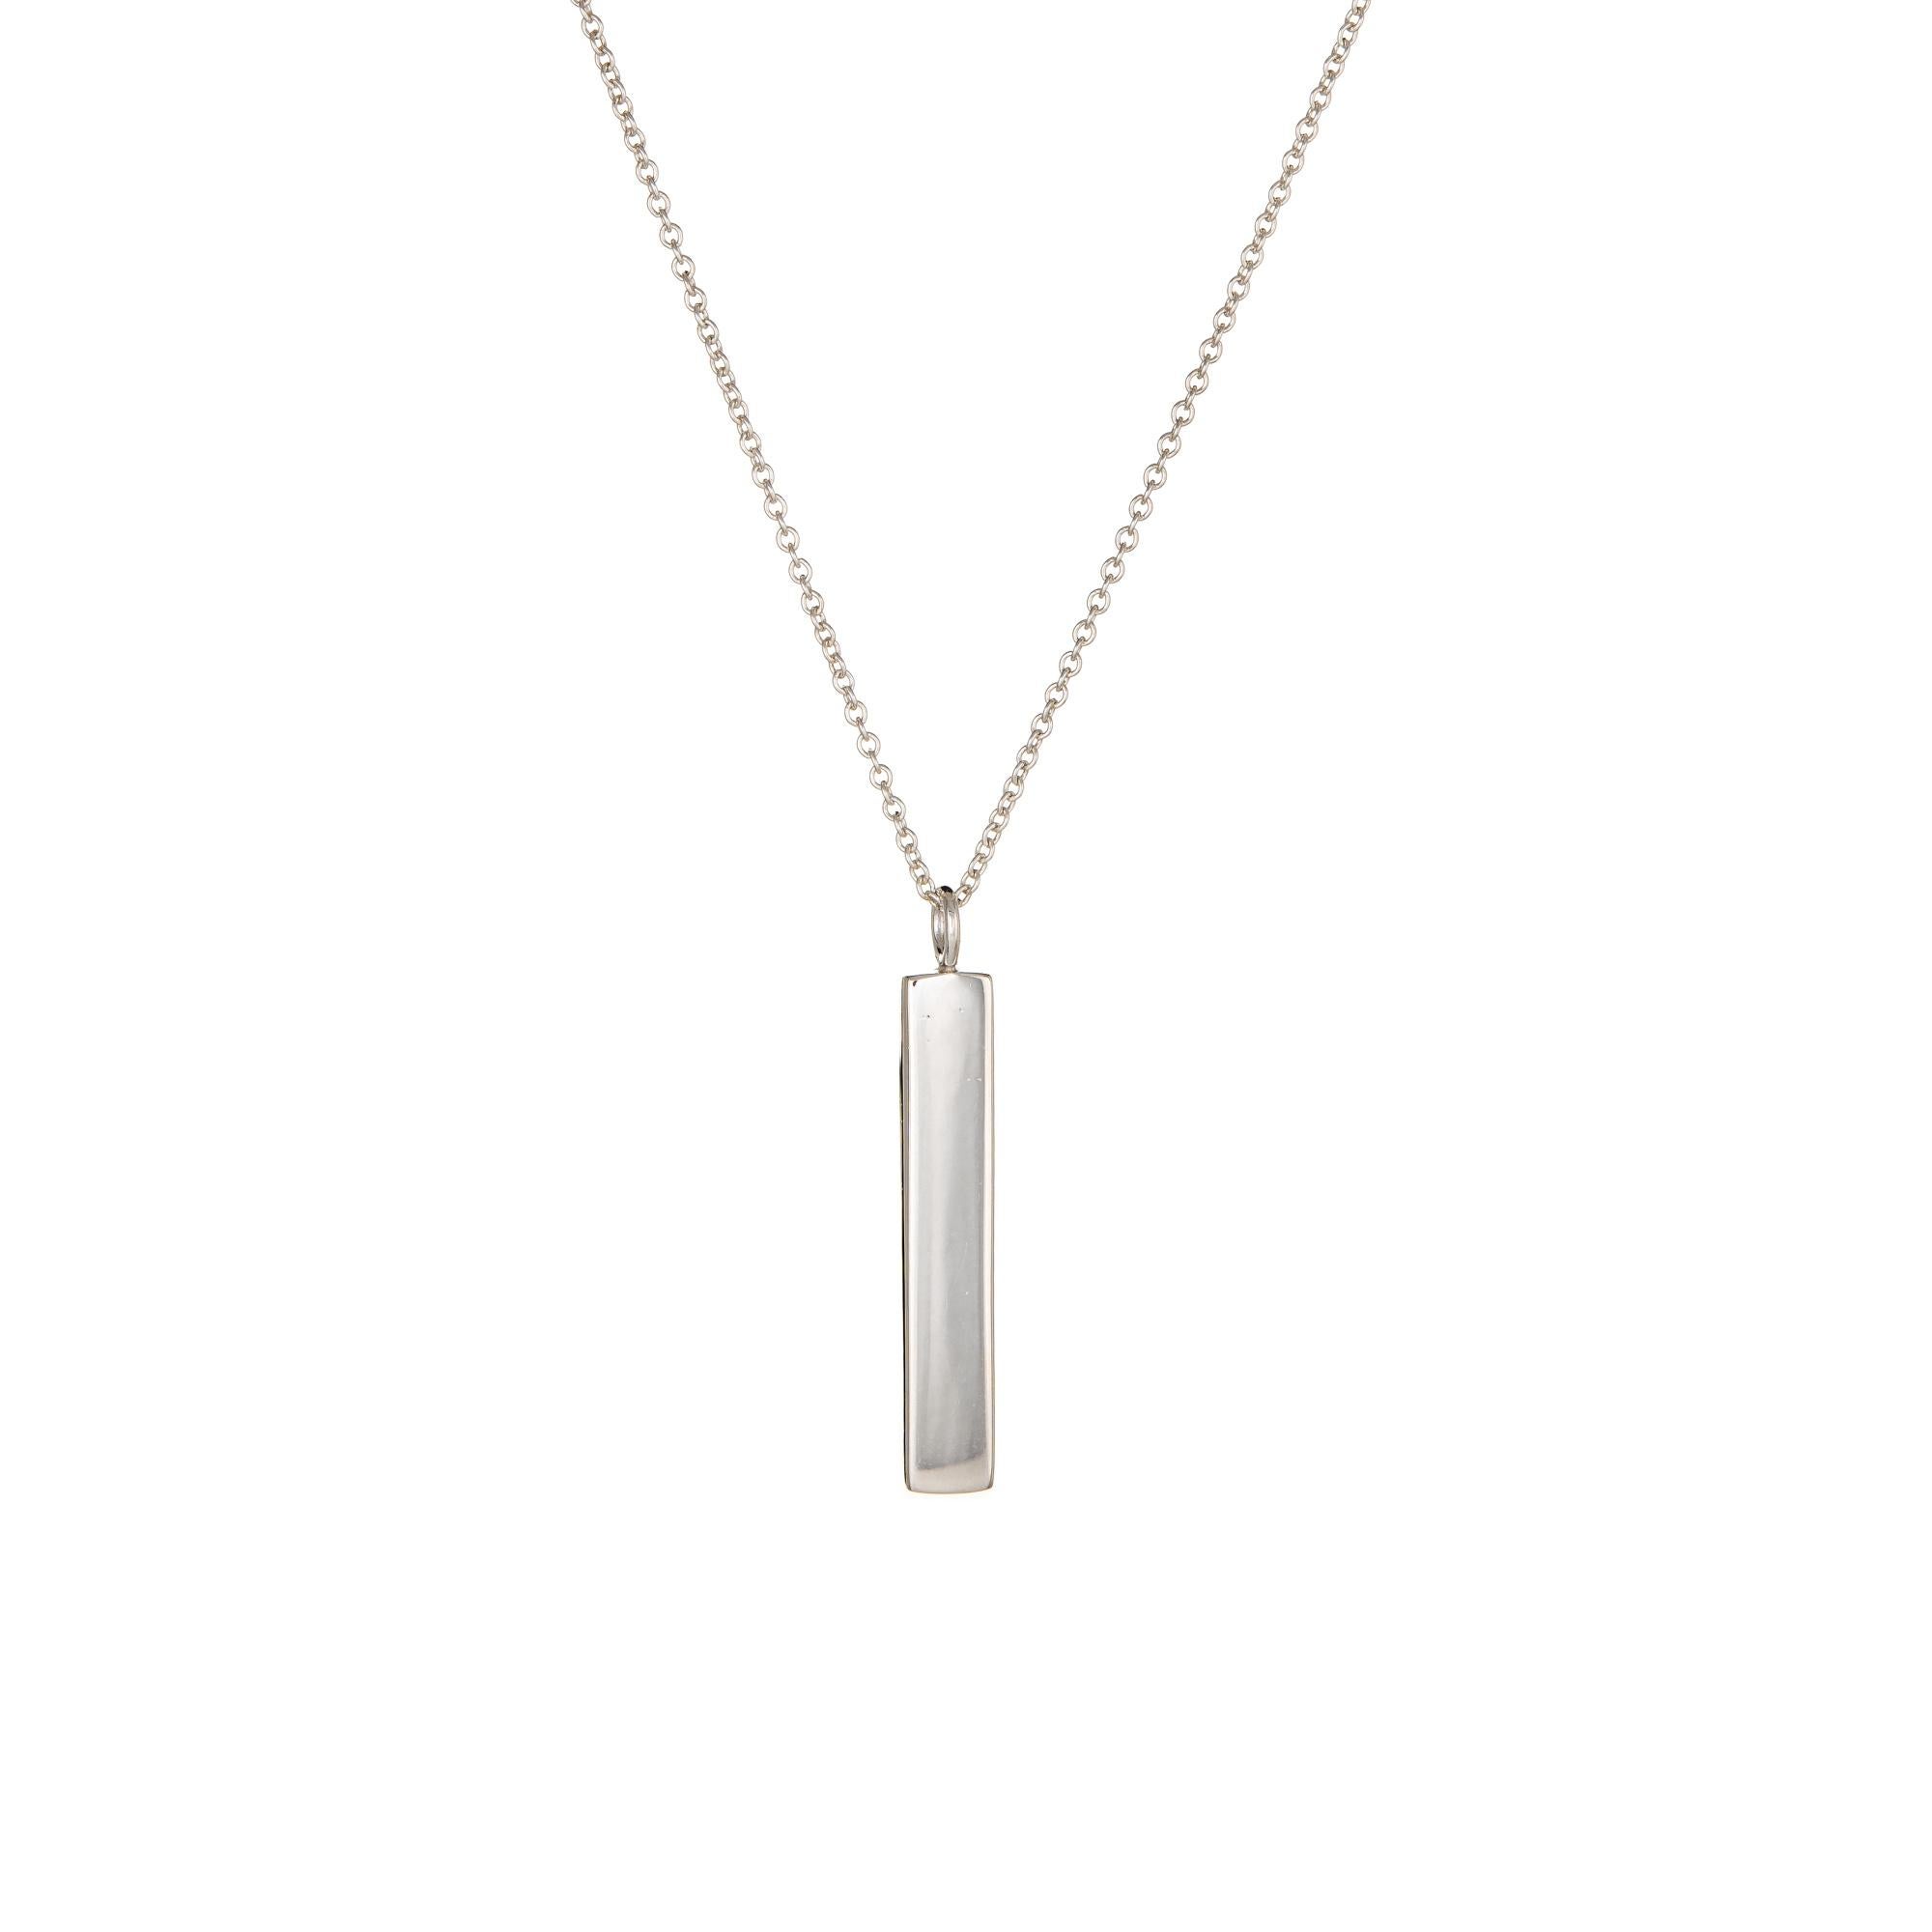 Finely detailed pre owned Tiffany & Co star notes bar necklace crafted in sterling silver.  

One estimated 0.02 carat diamond is set into the mount (estimated at F-G color and VS2 clarity) 

The necklace is in excellent original condition and was